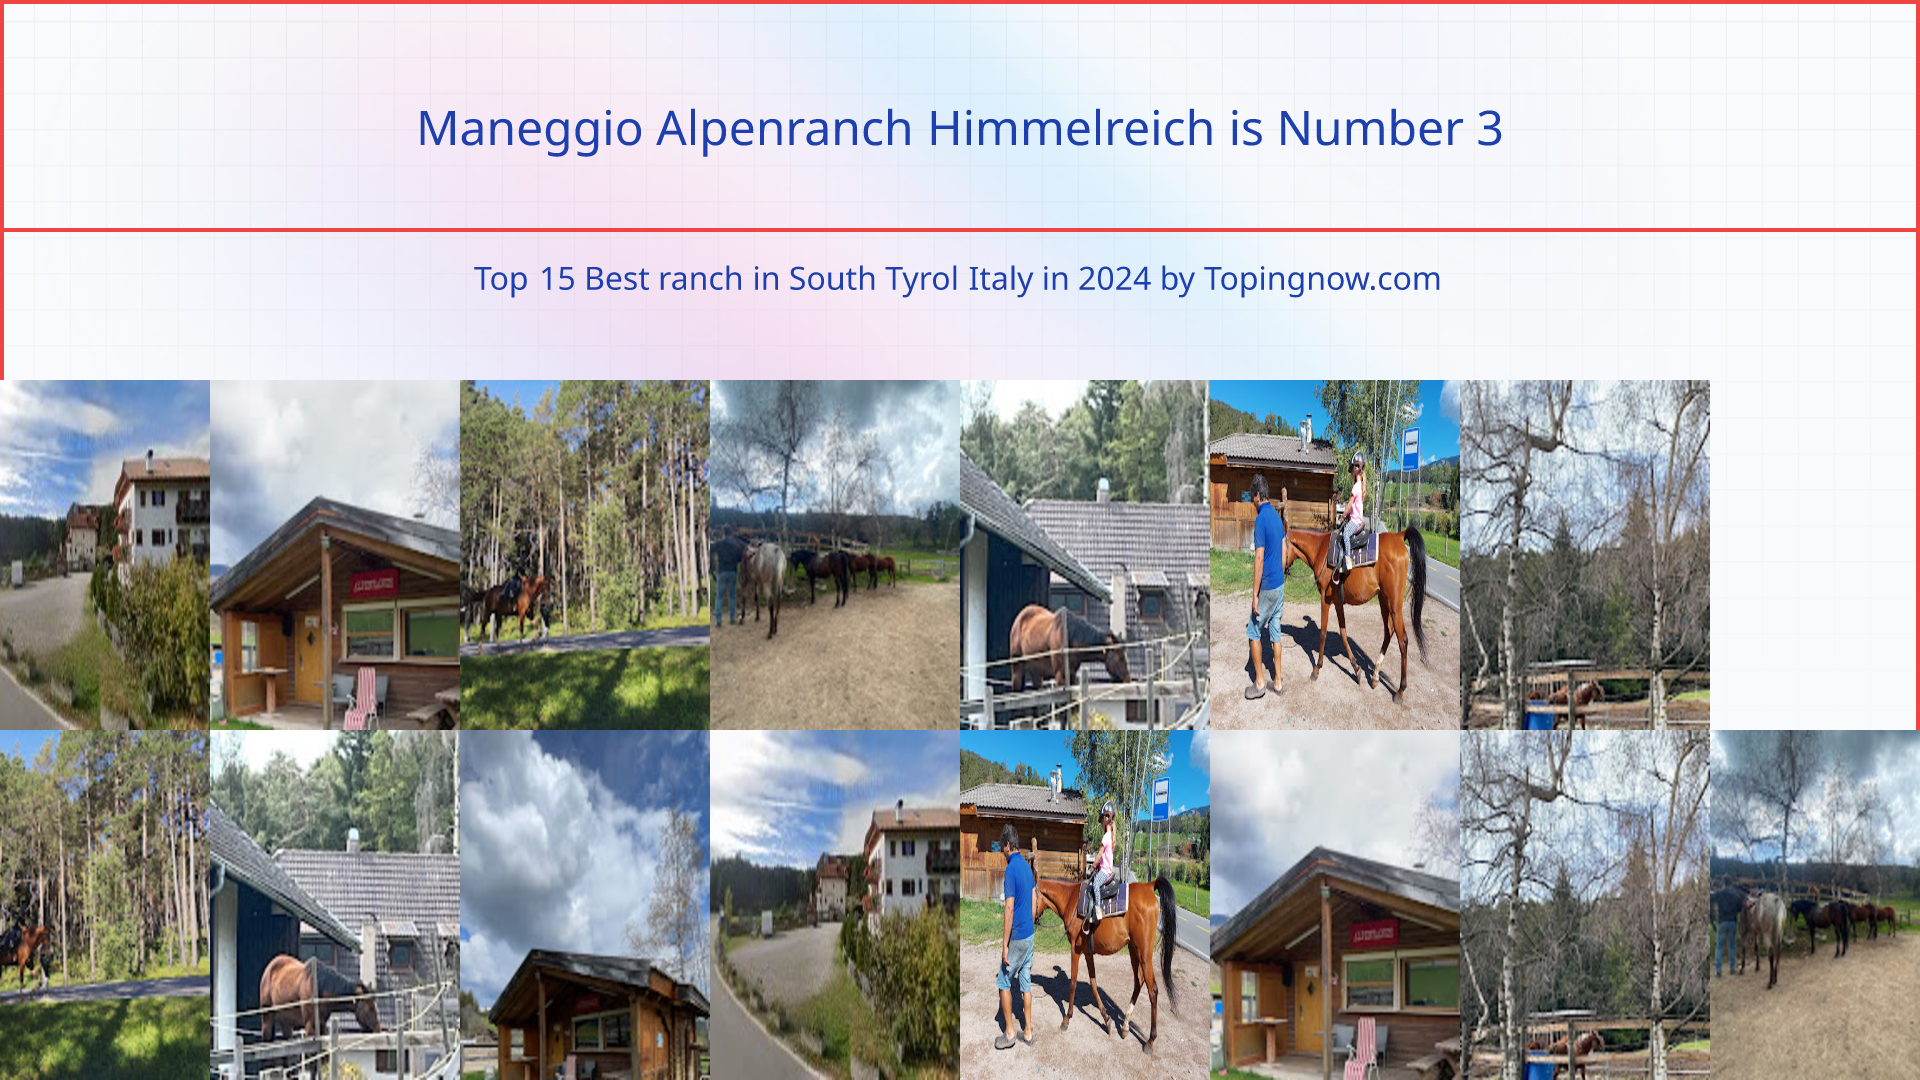 Maneggio Alpenranch Himmelreich: Top 15 Best ranch in South Tyrol Italy in 2024